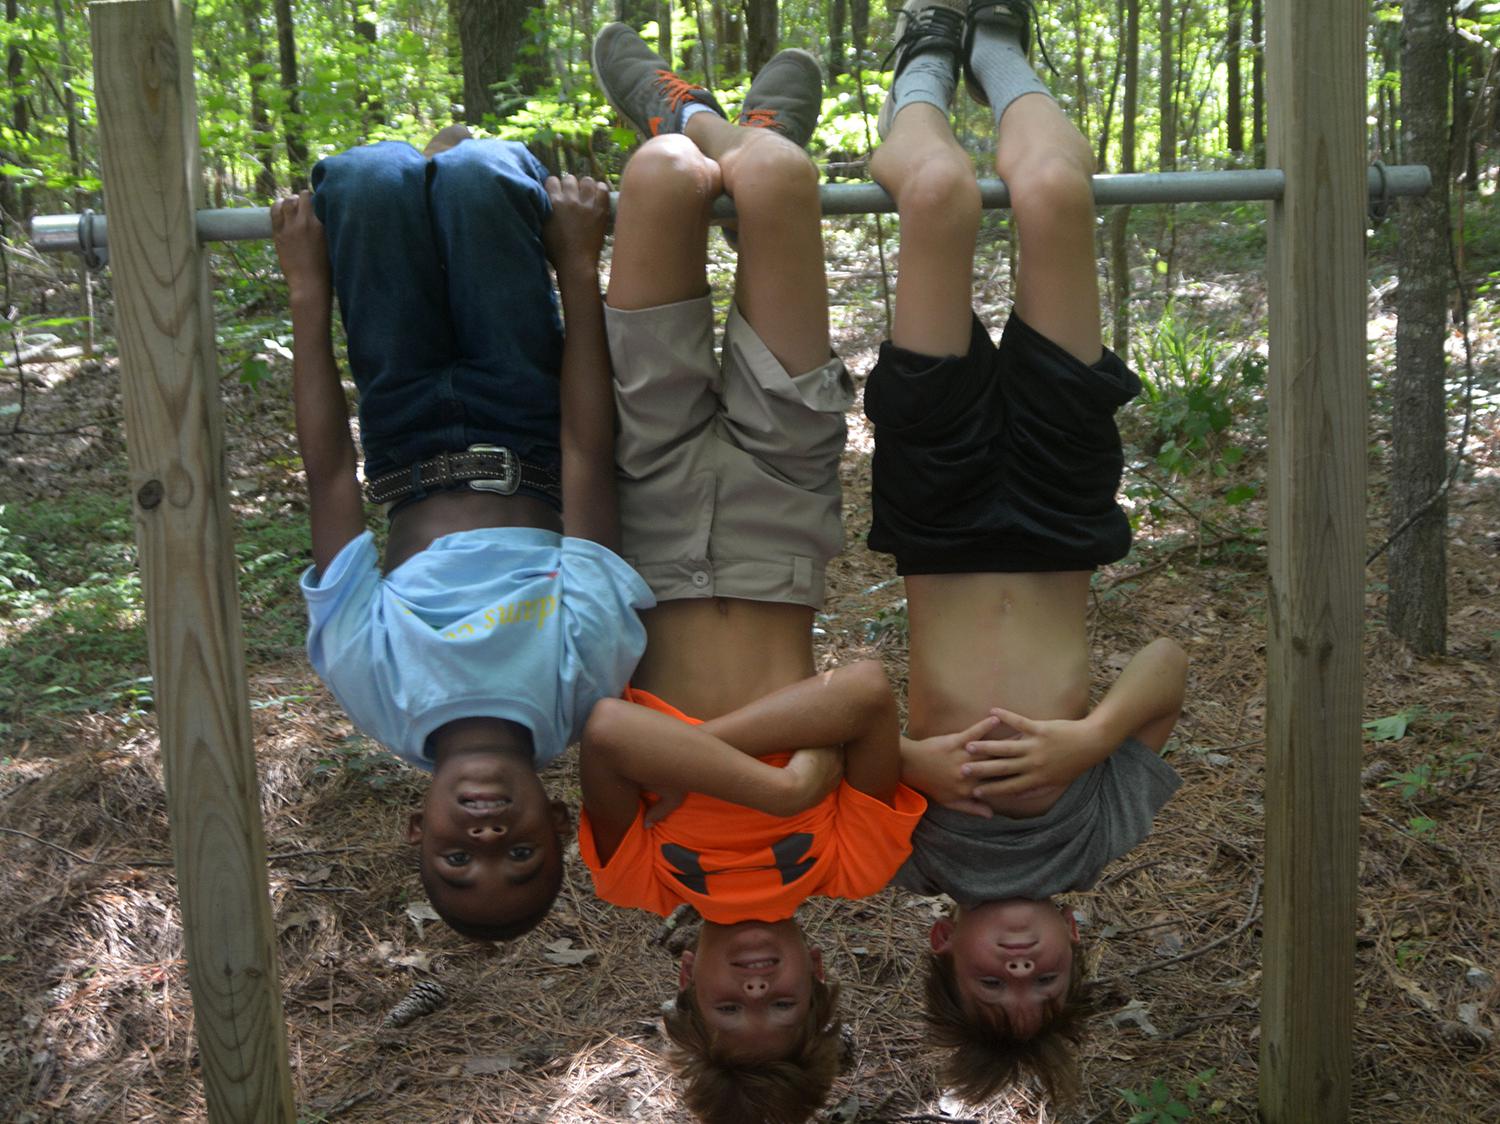 Imitating bats that like to hang upside down is a fun activity for children as they explore a nature trail at St. Catherine Creek National Wildlife Refuge near Natchez, Mississippi, on July 7, 2016. (Photo by MSU Extension Service/Linda Breazeale)